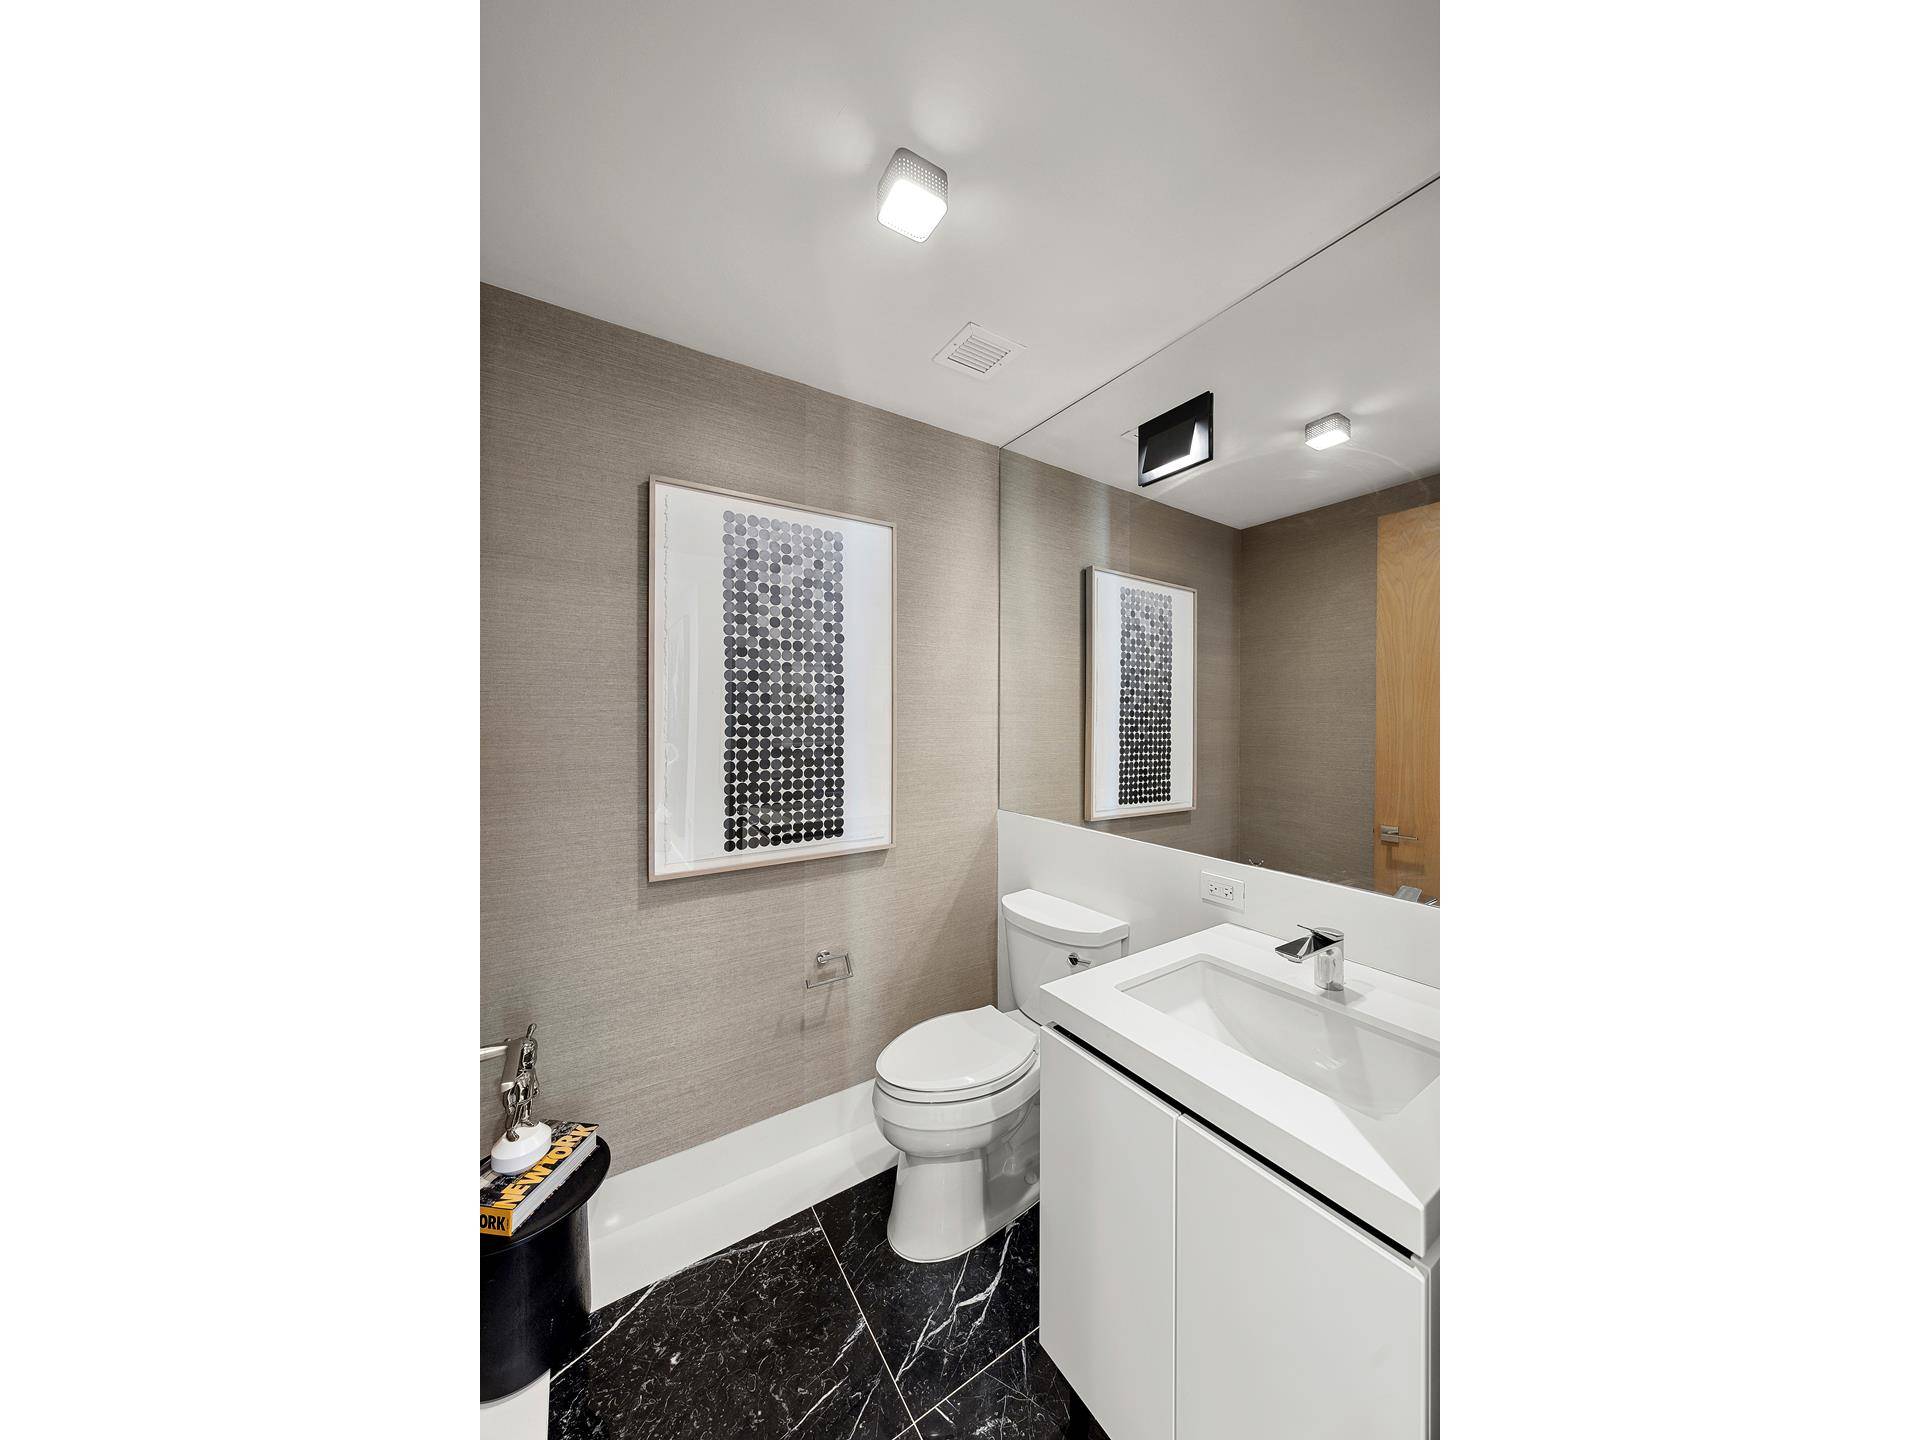 Residence 9D at 200 East 21st Street is a stunning 1, 464 square foot 2 bedroom, 2.